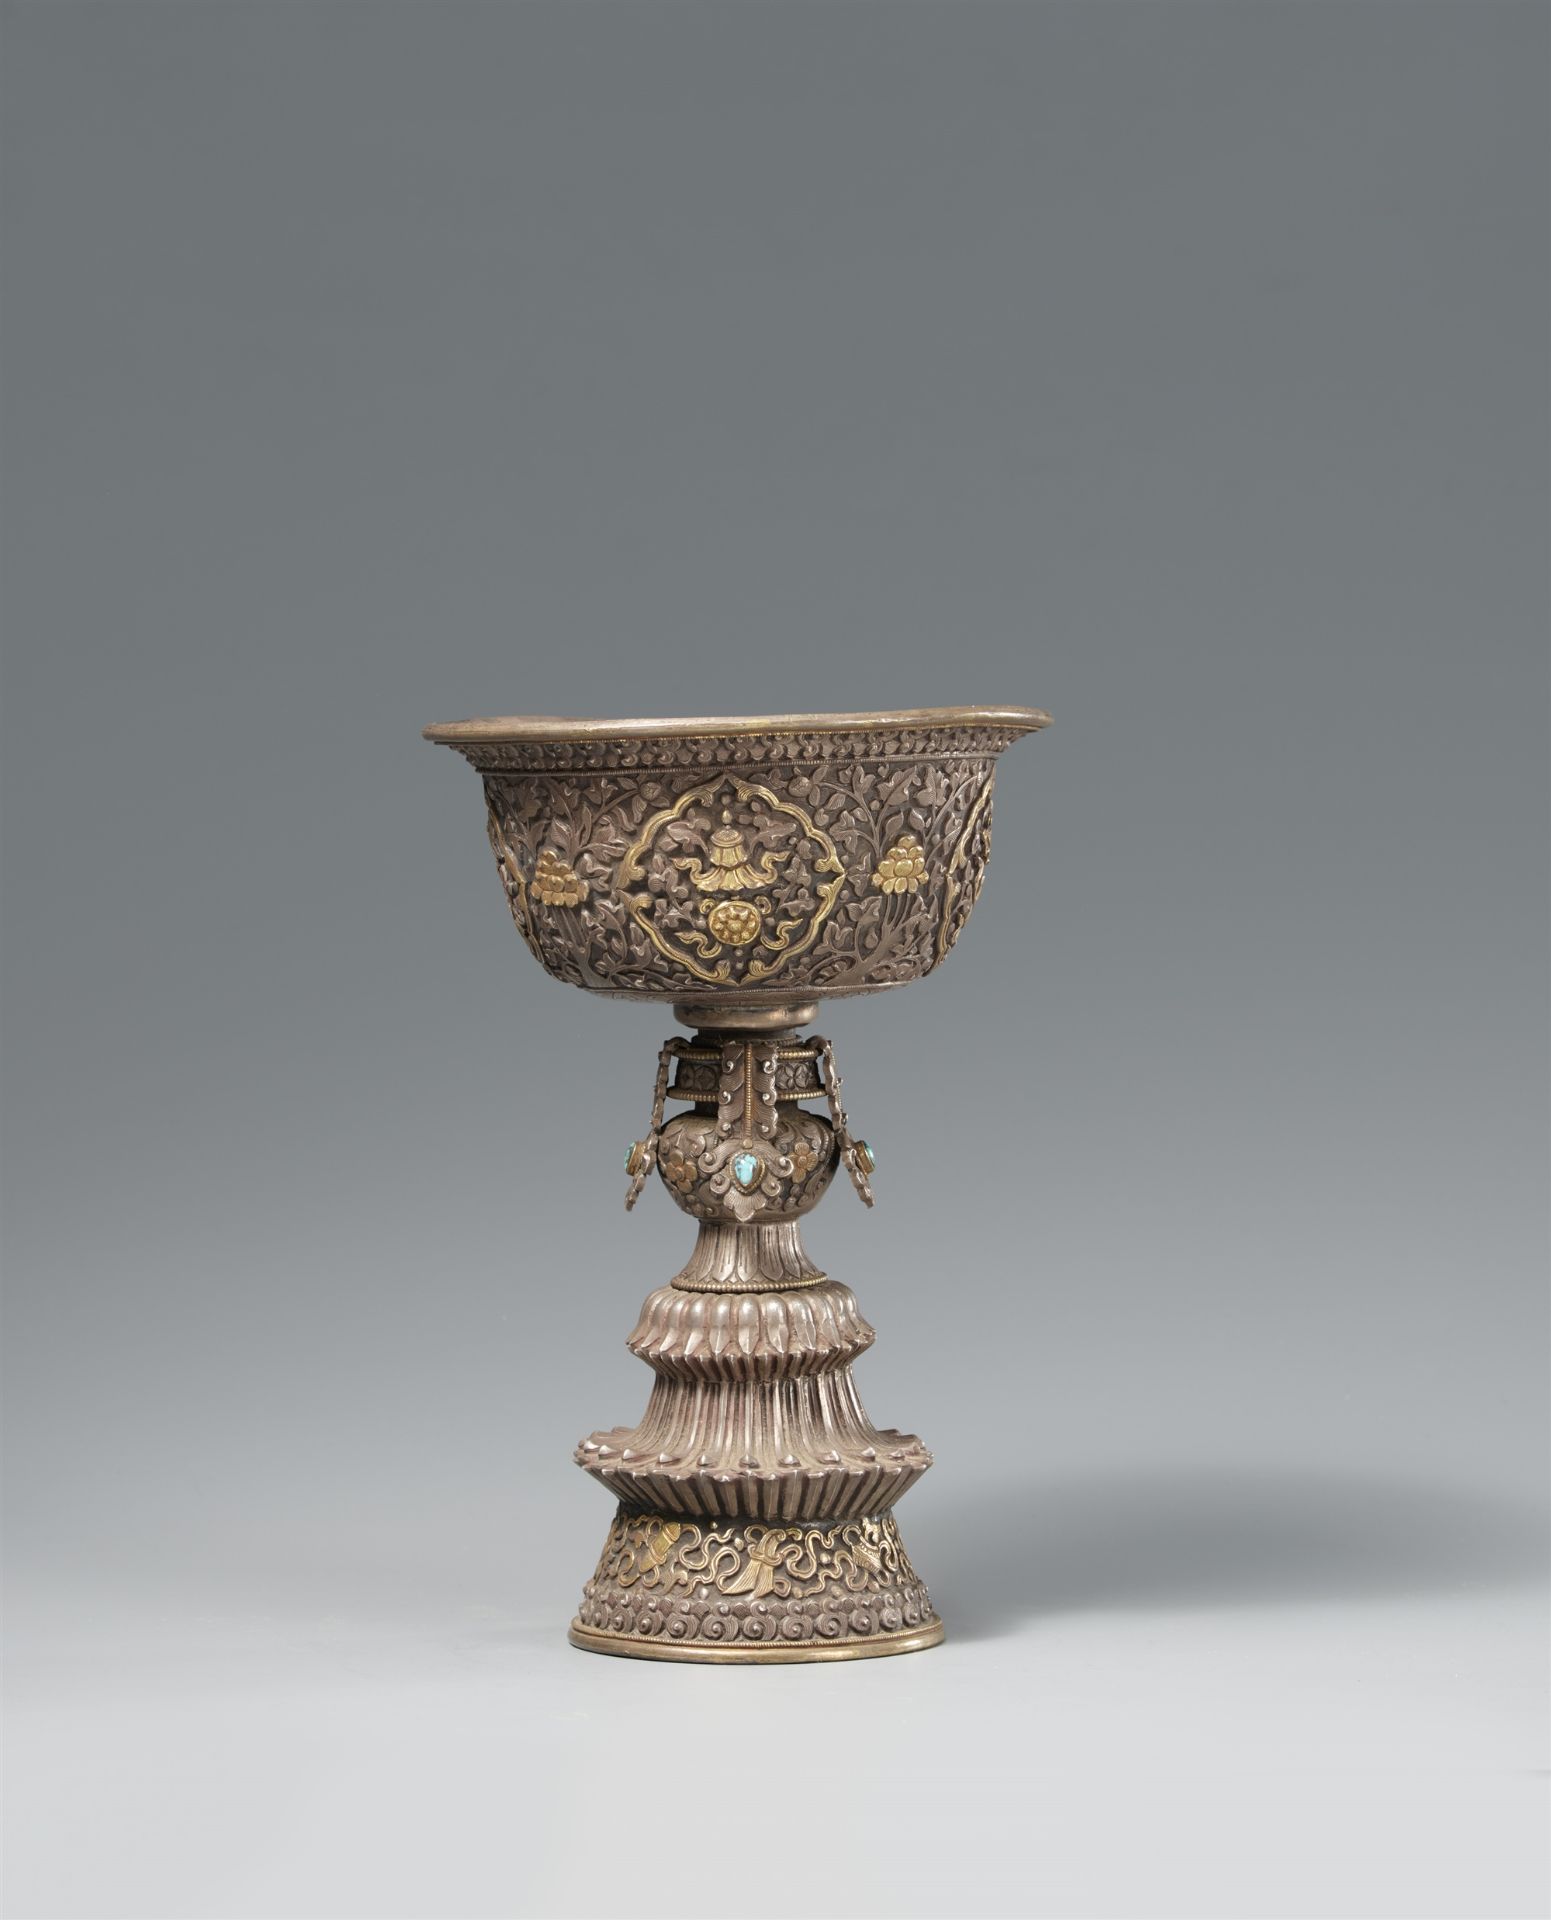 A bajixiang repoussé butter lamp (offering lamp). Tibet, 19th century - Image 3 of 4